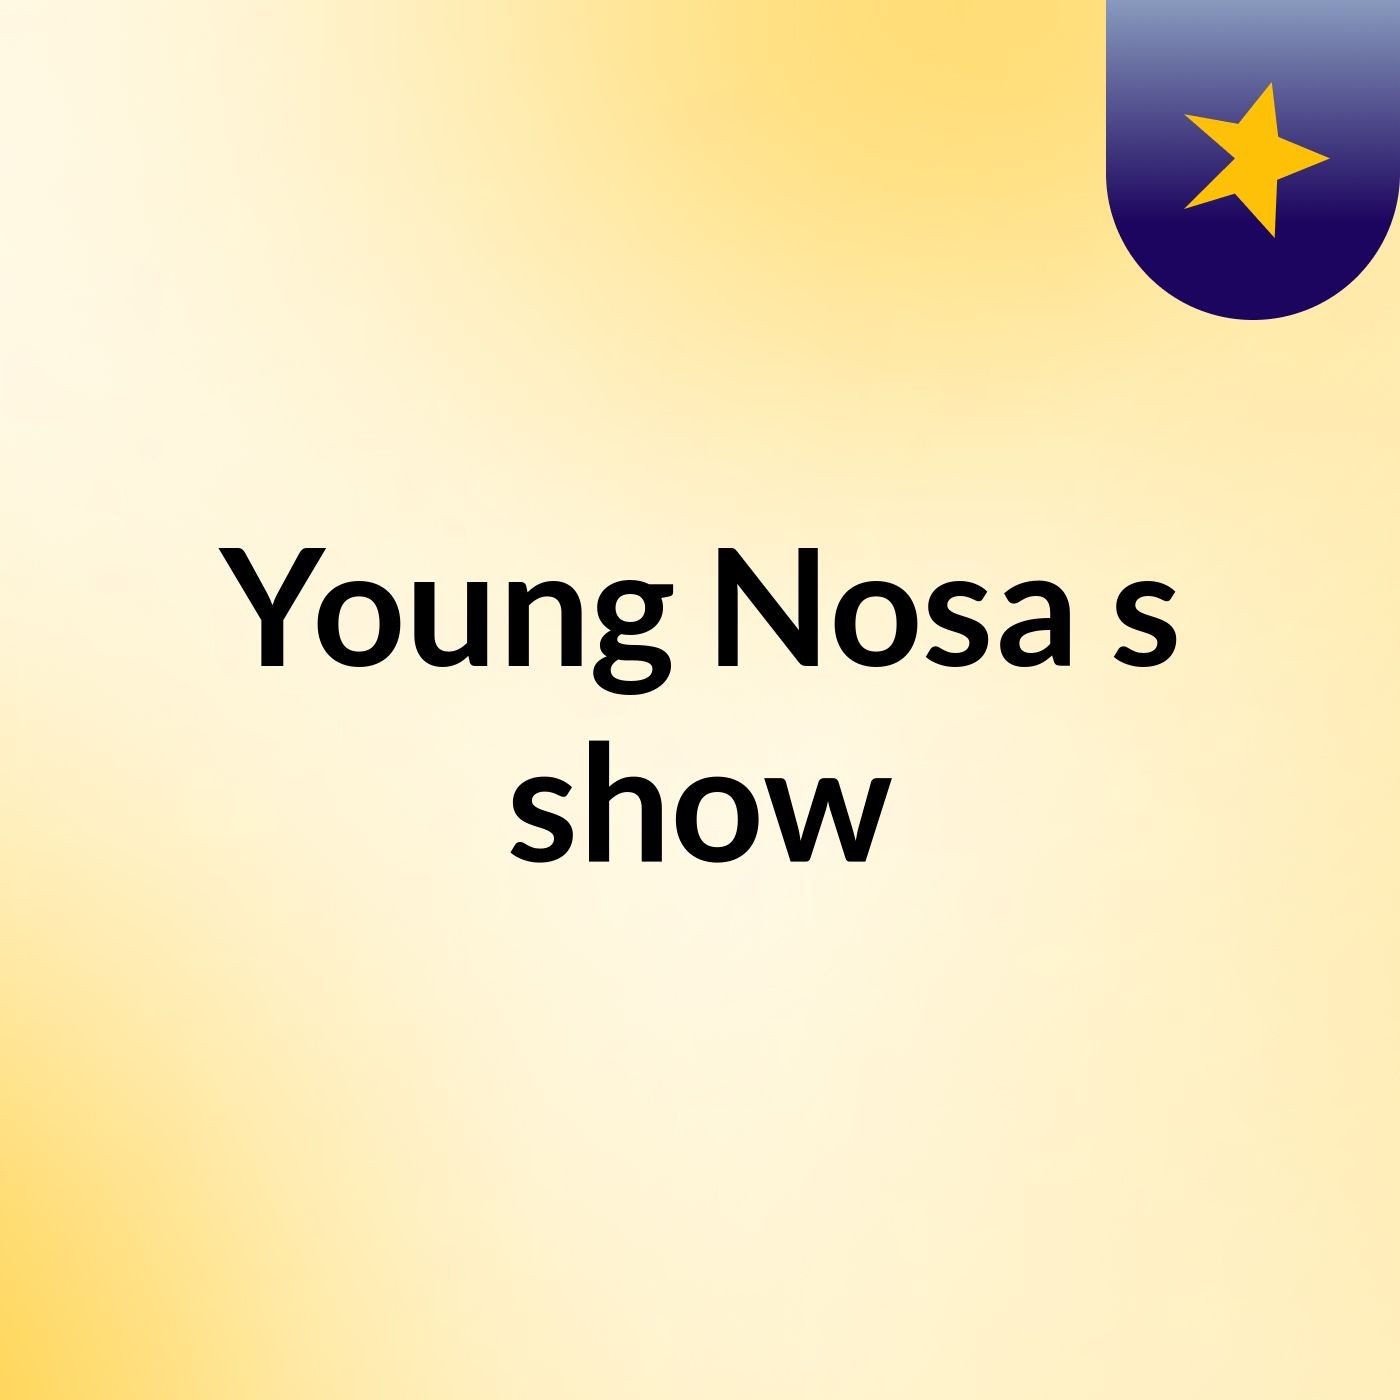 Young Nosa's show